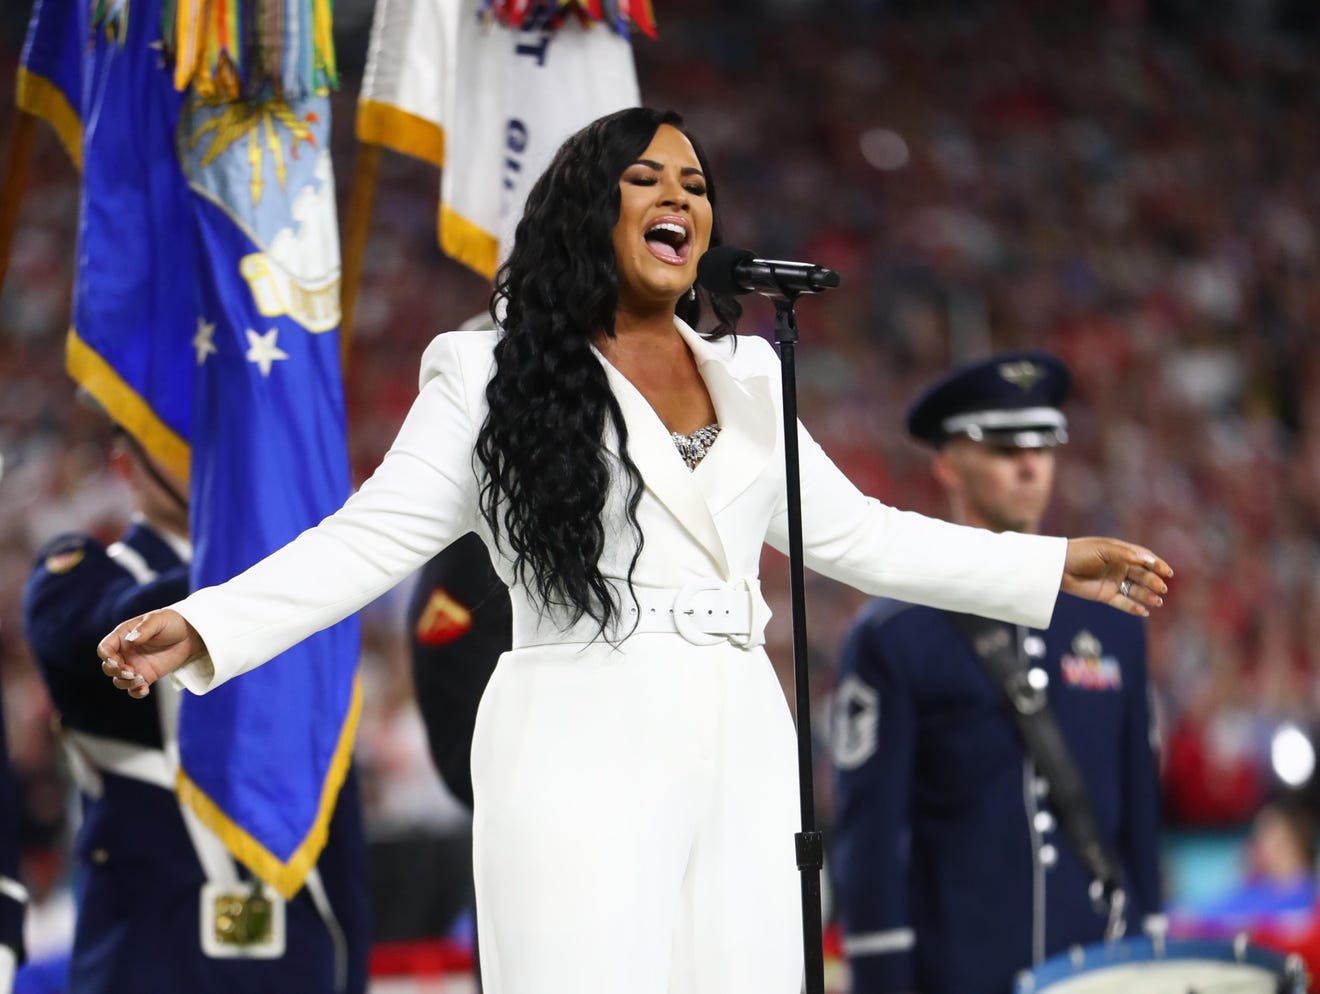 Demi Lovato's Super Bowl national anthem is pitchperfect